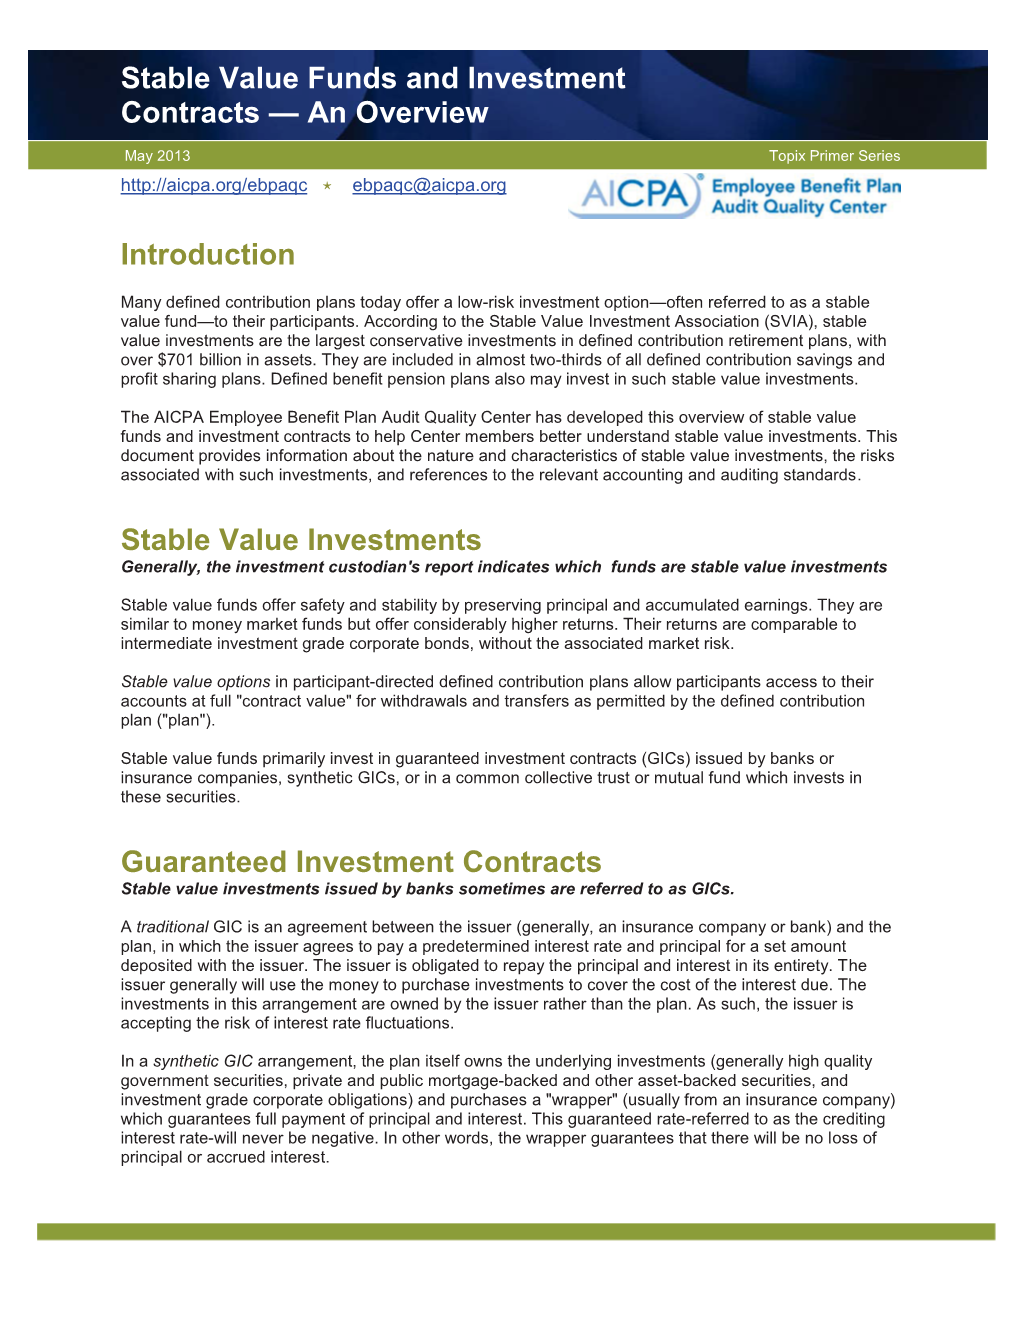 Stable Value Funds and Investment Contracts — an Overview